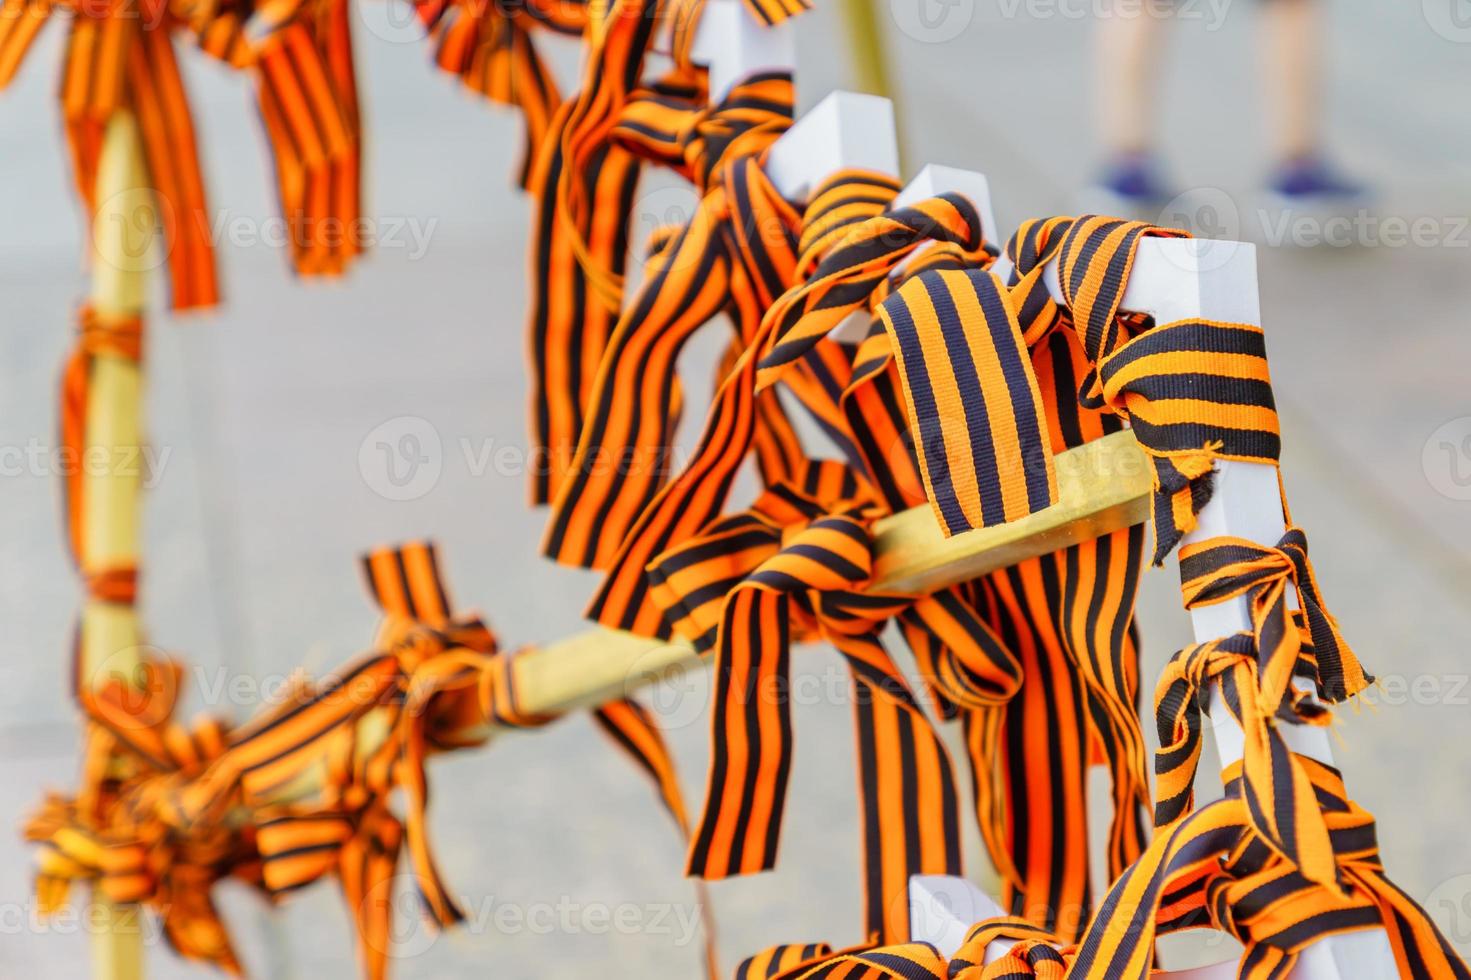 Many of St. George's ribbon tied on the white metal construction as symbol of the Great Patriotic War and Second World war.  May 9. Victory day photo